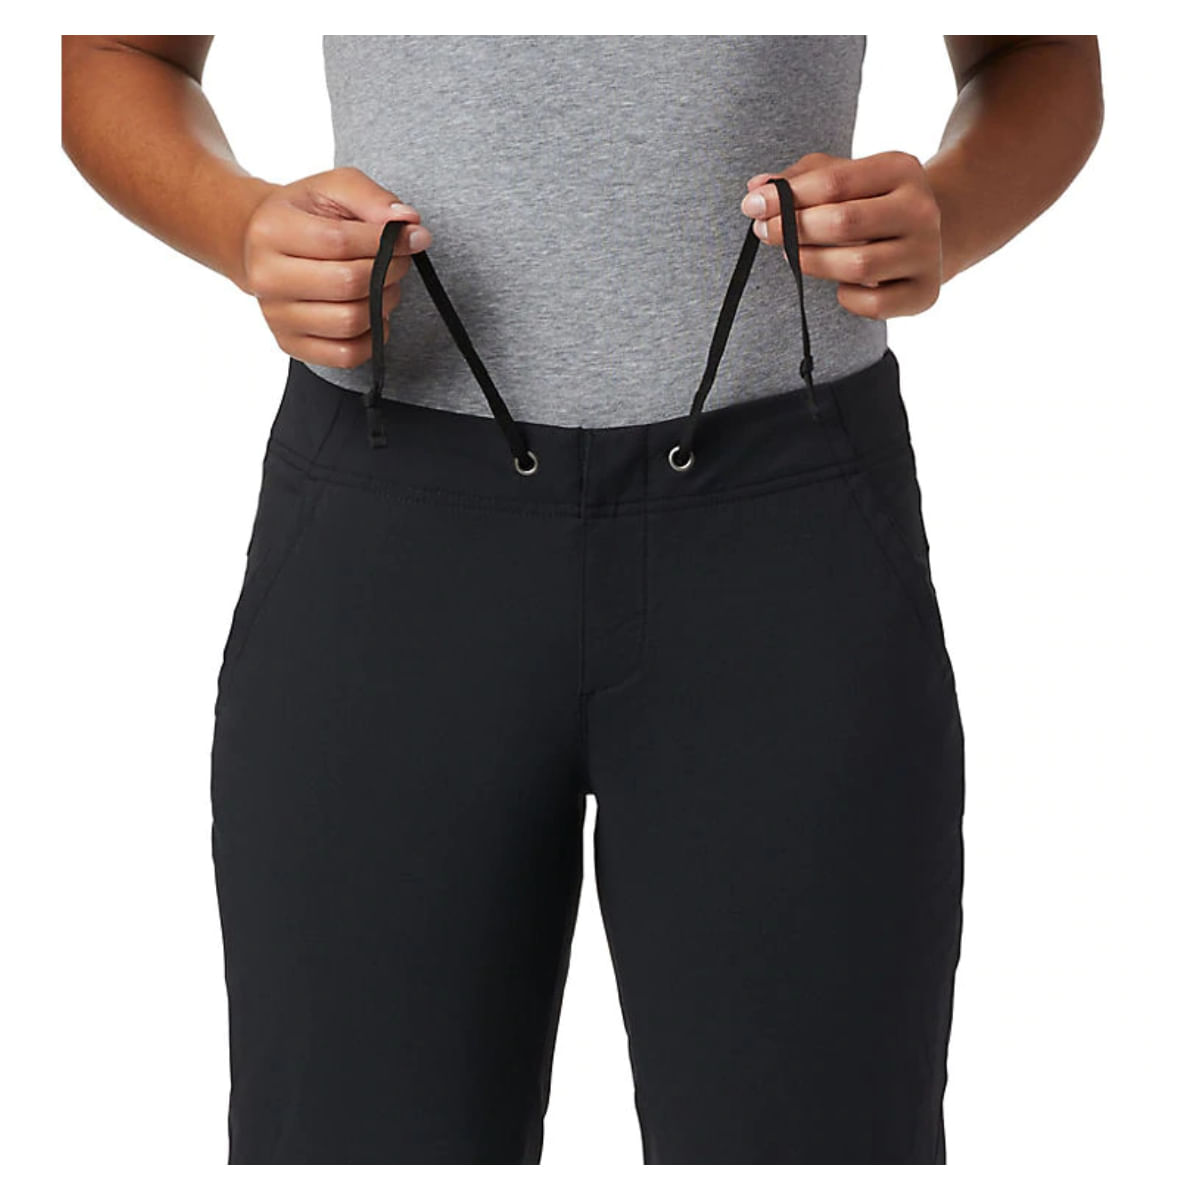 Columbia Anytime Outdoor Full Leg Pants for Ladies